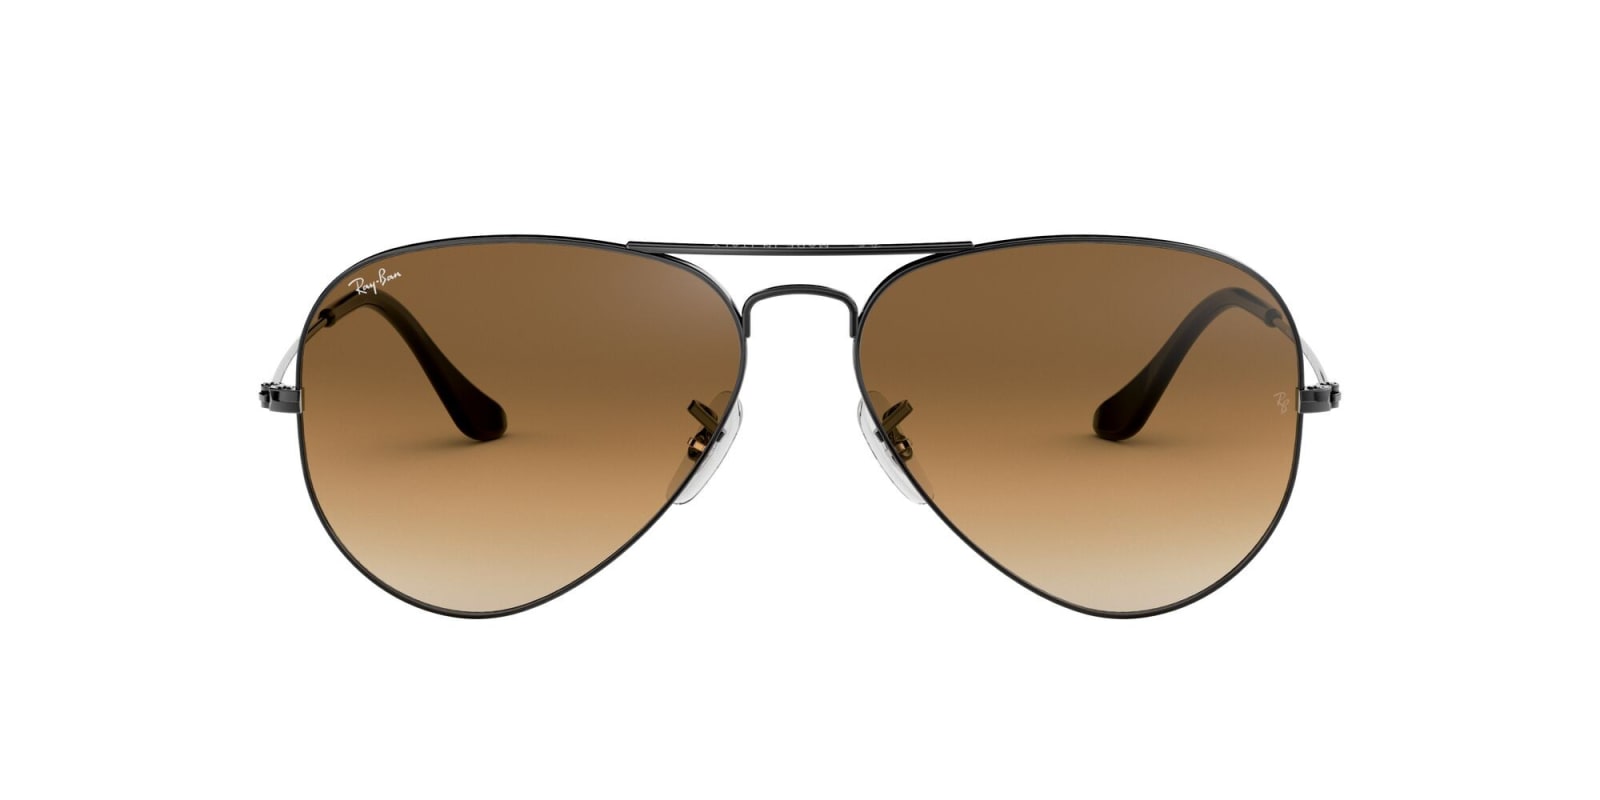 Ray Ban Sunglasses In Brown